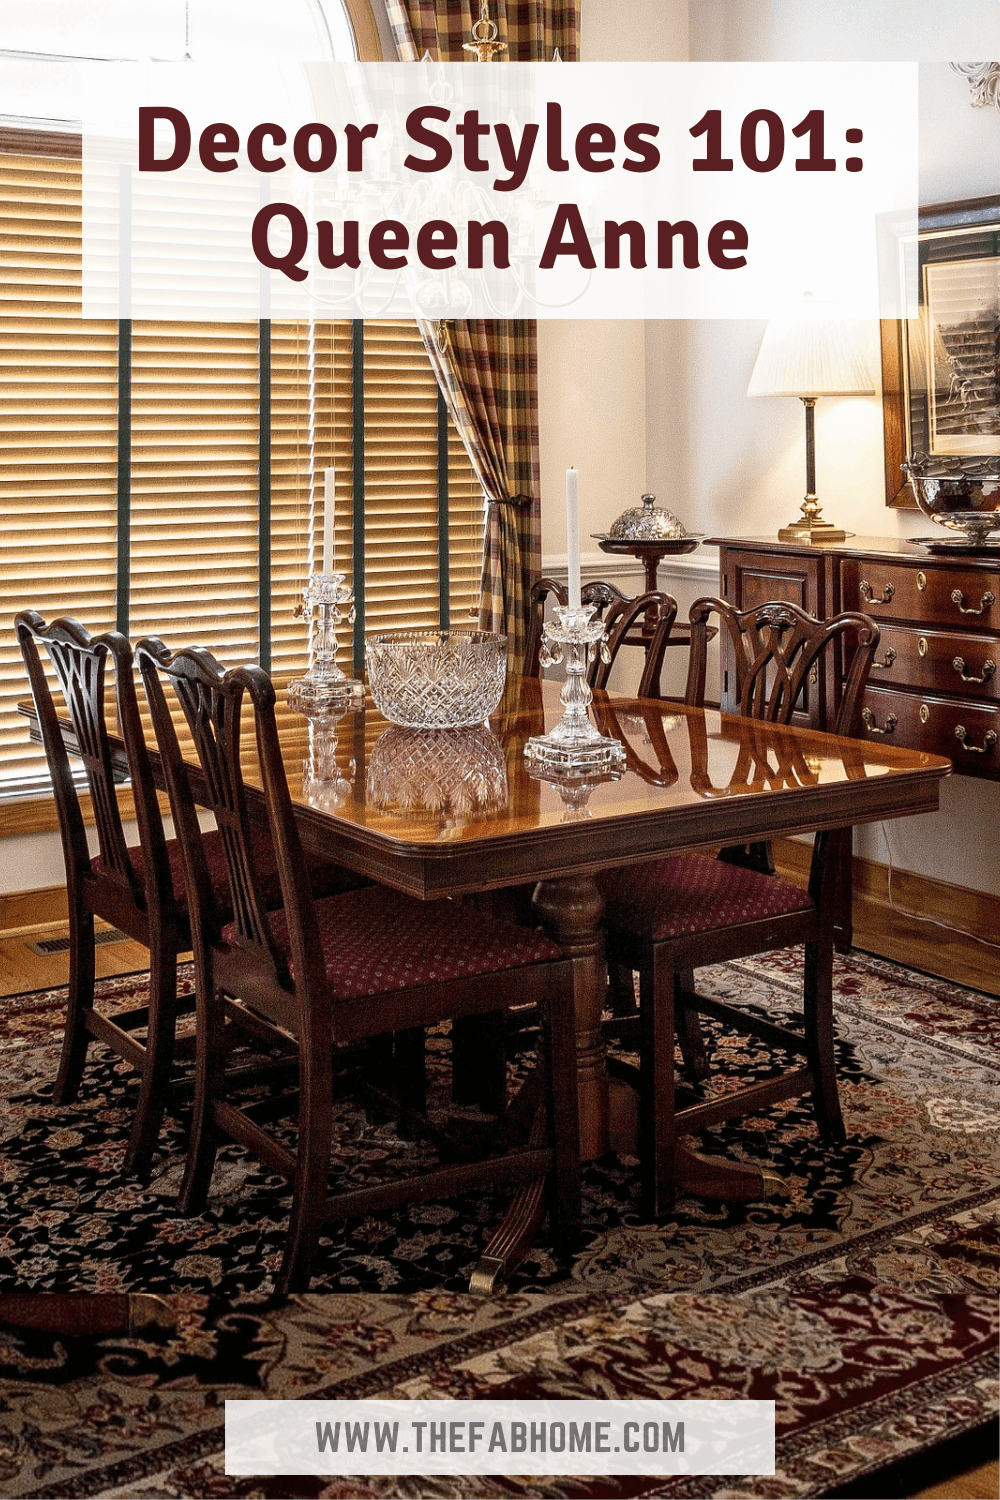 Travel back in time and relish some old world charm with the Queen Anne style! Mix this style with others or try it out on its own!